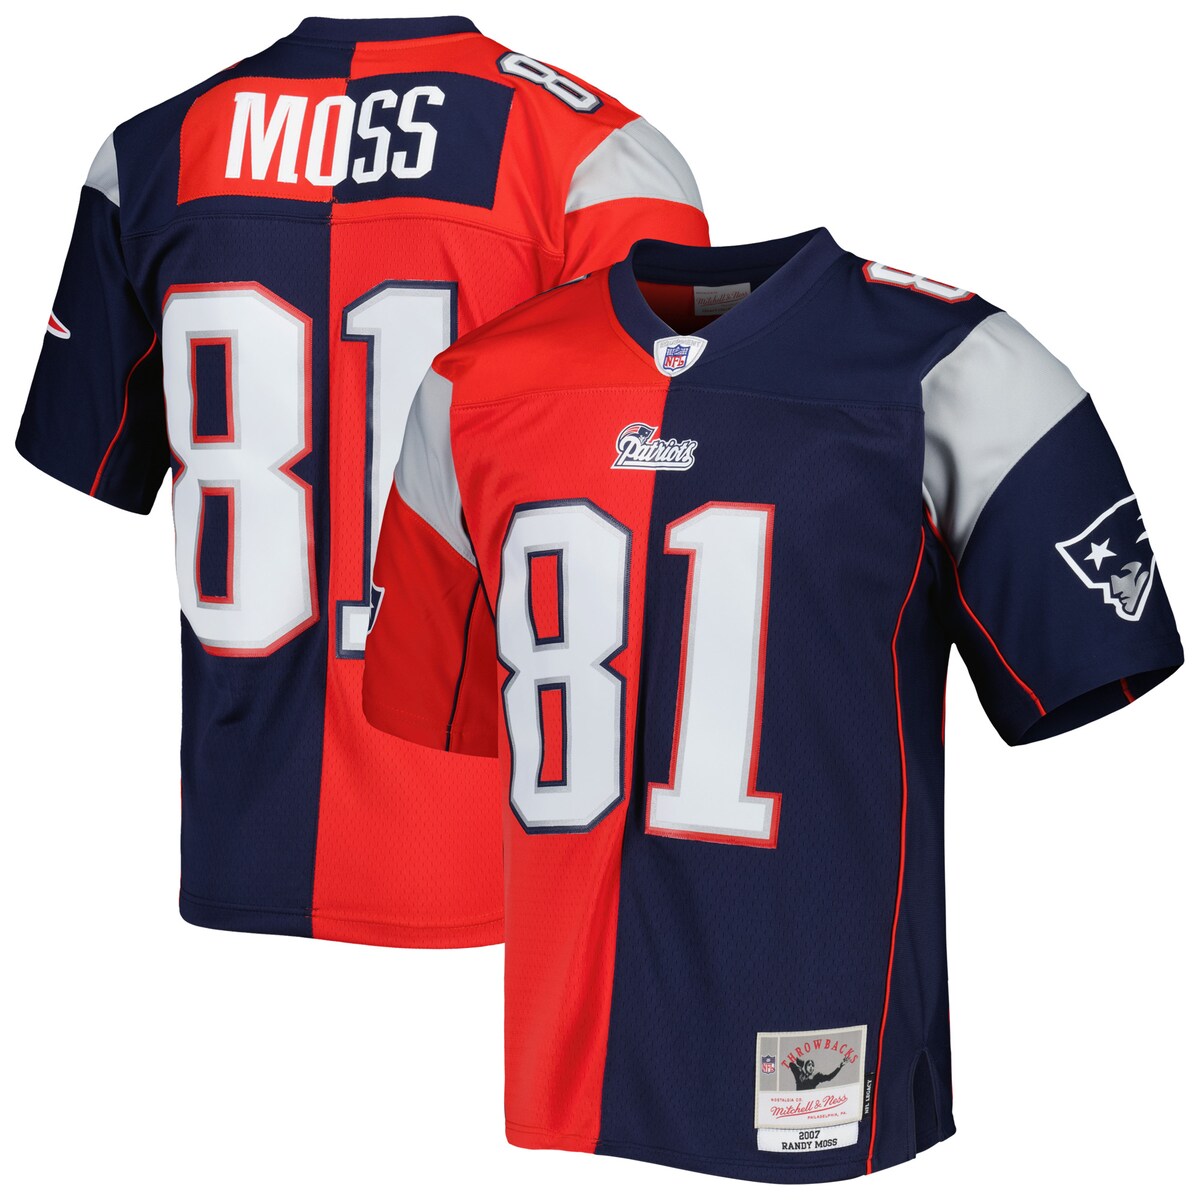 Showcase your love for one of the greatest players of all time in a fresh and unique way with this Randy Moss Split Legacy jersey from Mitchell & Ness. This contrasting New England Patriots jersey design features the name and number across multiple colors and trims, allowing you to boast your Randy Moss spirit loud and proud. Additionally, the lightweight design and droptail hem bring comfort to your New England Patriots game day gear.Machine wash, line dryOfficially licensedImportedMesh fabricReplica Throwback JerseyBrand: Mitchell & NessShort sleevesSide split hemStitched NFL Shield at collarTackle twill graphicsV-neckWoven tags at bottom hemMaterial: 100% Polyester